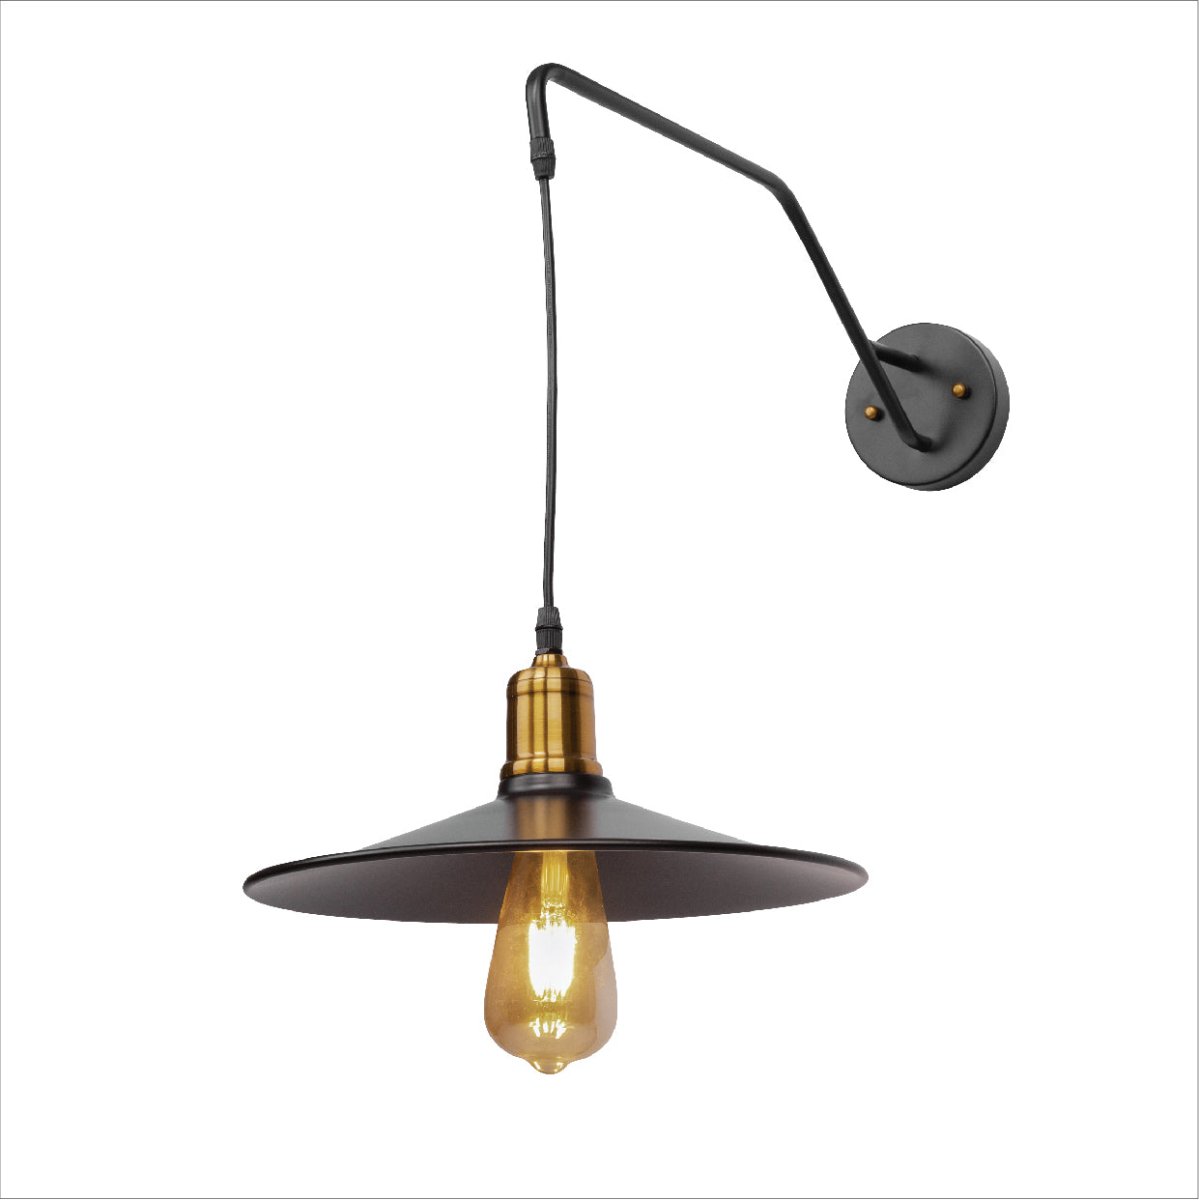 Main image of Black Gold Metal Suspended Wall Light with E27 Fitting | TEKLED 151-19636